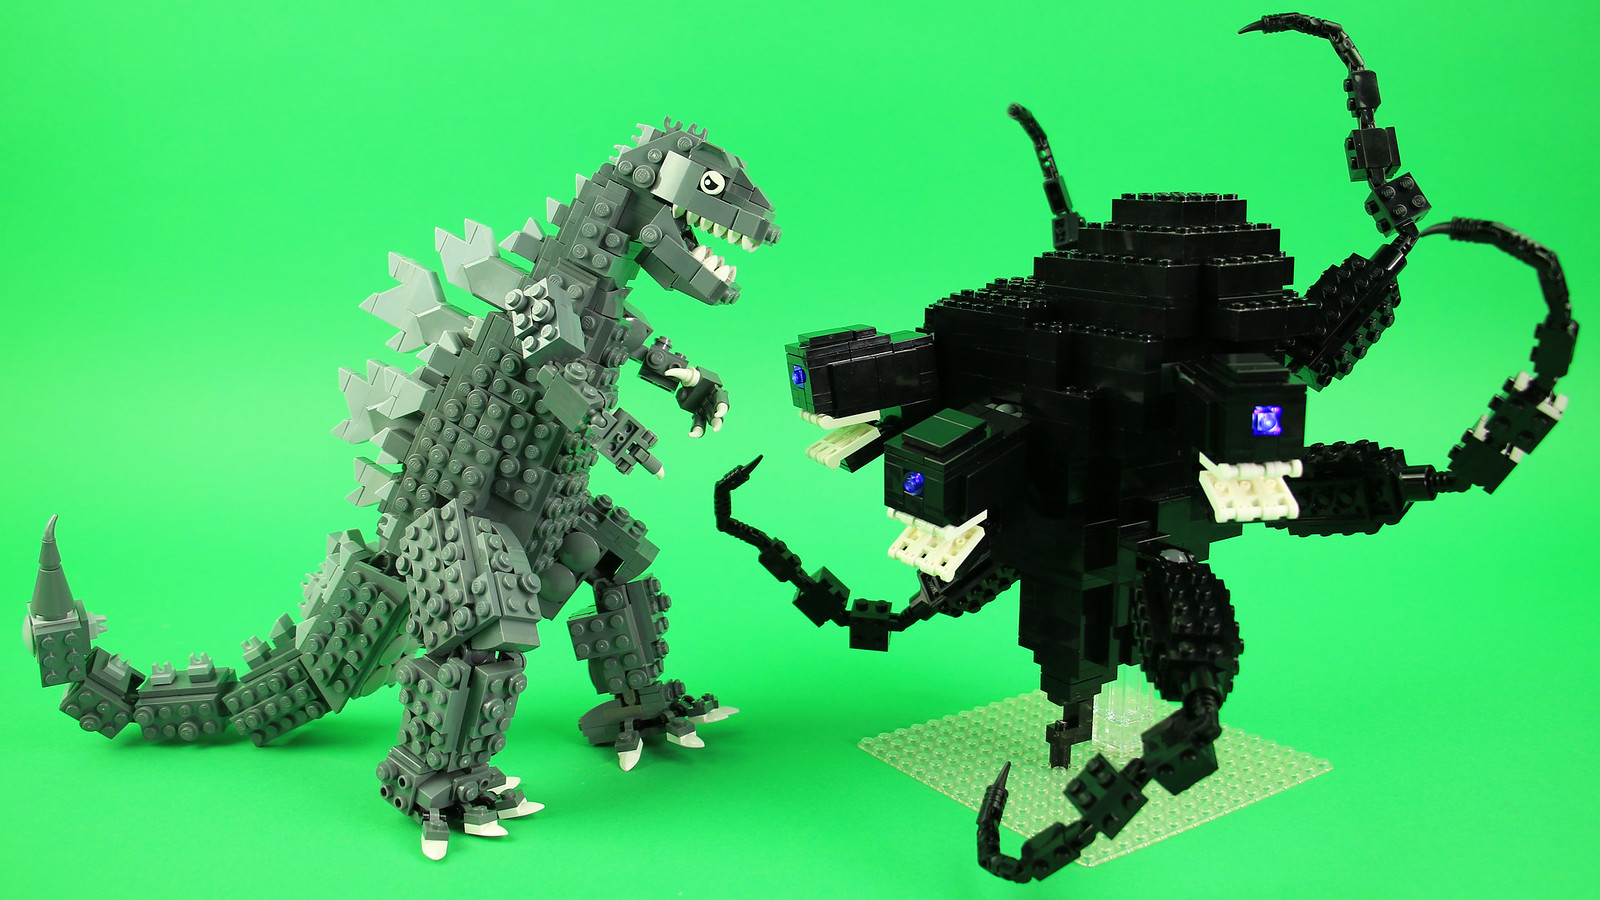 LEGO Godzilla vs Wither Storm, See how to build it: www.you…